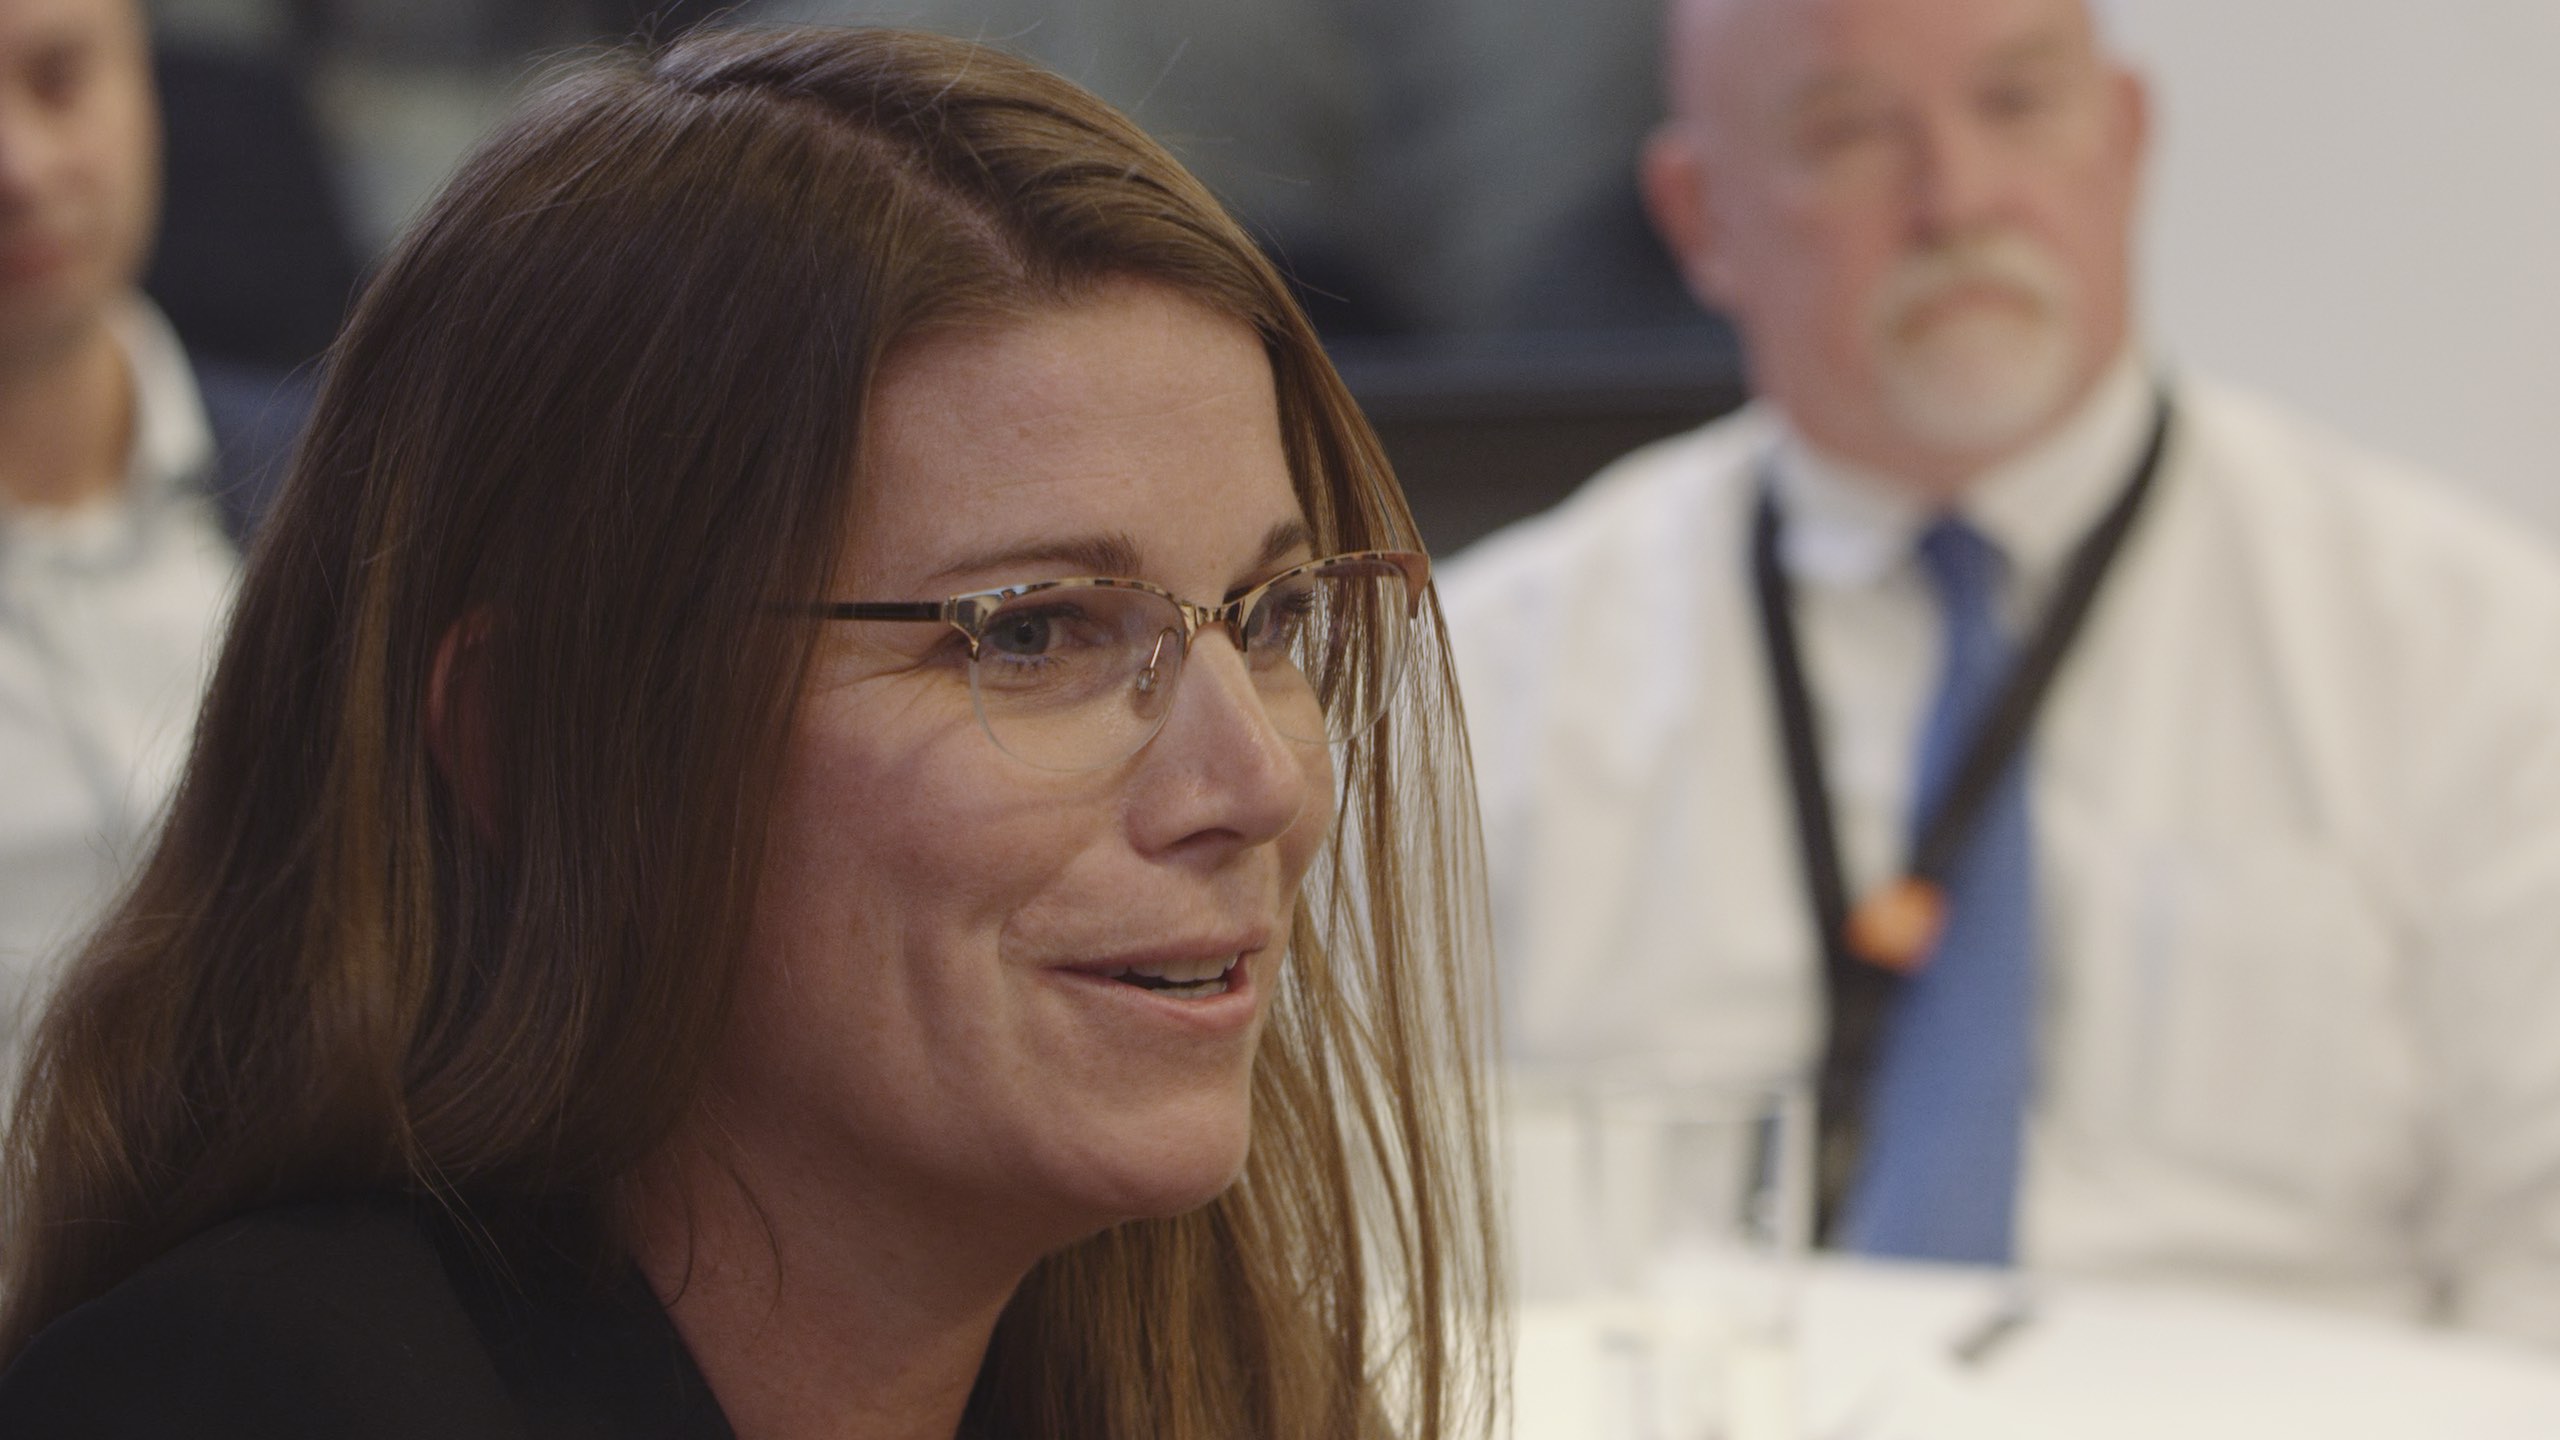 Stantec UK and NY Livestream International Live Streaming Event Closeup of woman with long brown hair wearing glasses talking with people in the background